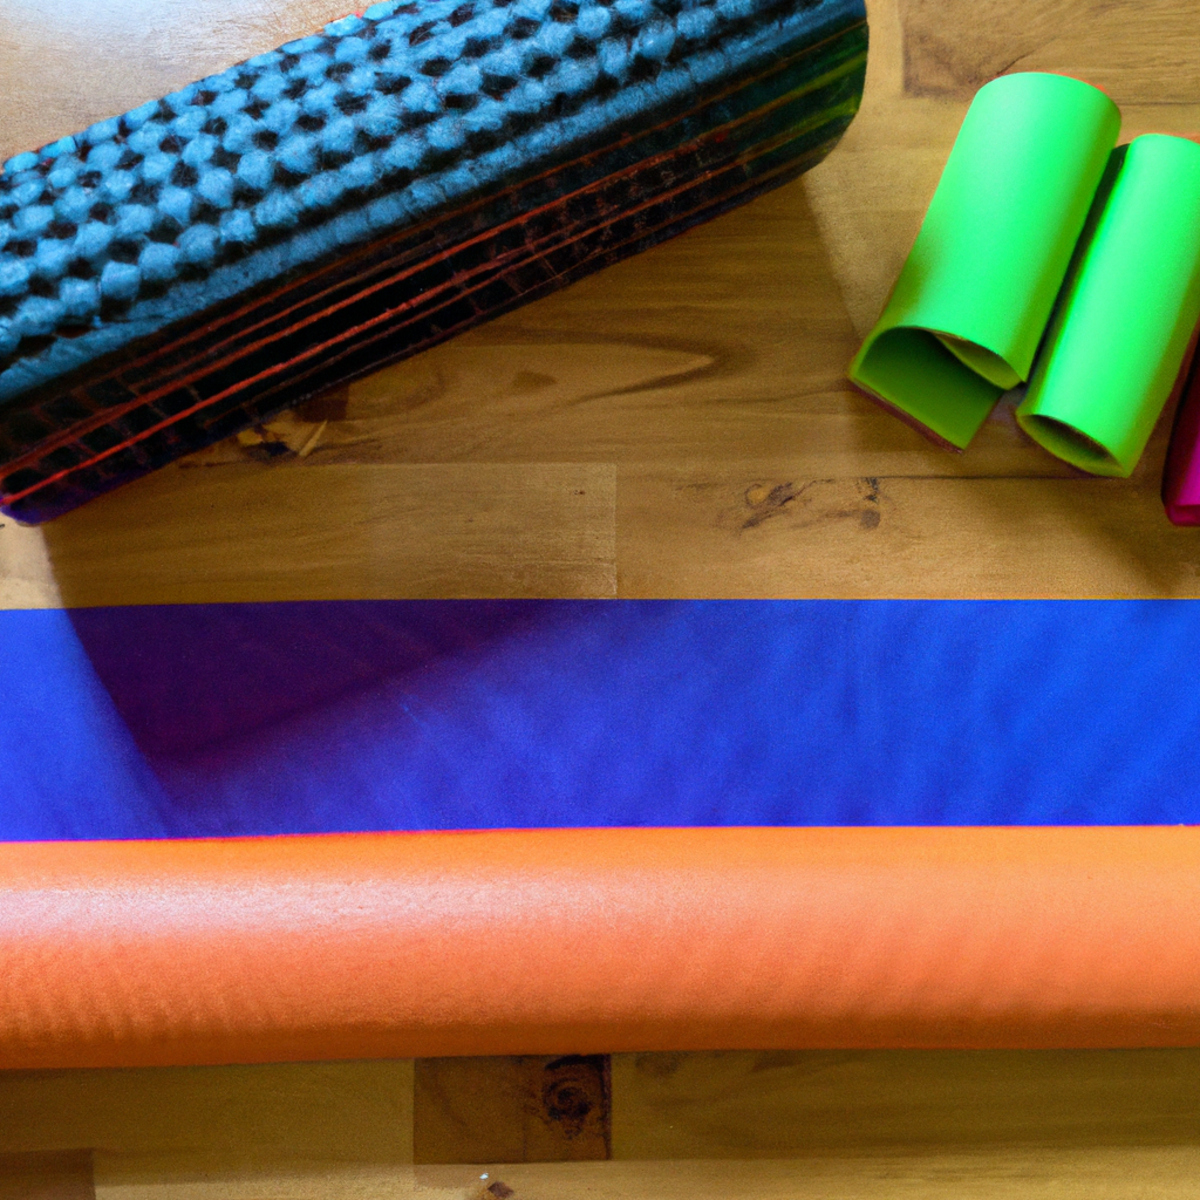 The photo features a set of colorful resistance bands, a foam roller, and a yoga mat arranged neatly on a hardwood floor, all geared towards senior exercises and fitness. The bands, designed specifically for seniors, are stretched out in different lengths, ready for use in a variety of exercises targeting strength and flexibility. The foam roller, known for its therapeutic benefits, is positioned in the center of the frame, its textured surface inviting viewers to imagine the relief it could provide for sore muscles often experienced by seniors. The yoga mat, tailored to accommodate the needs of older individuals, is rolled up and placed to the side, hinting at the potential for a calming yoga practice designed to enhance balance and stability. The overall composition of the photo suggests a sense of order and intentionality, reflecting the importance of thoughtful exercise for seniors with joint pain and the recognition of their specific fitness requirements.